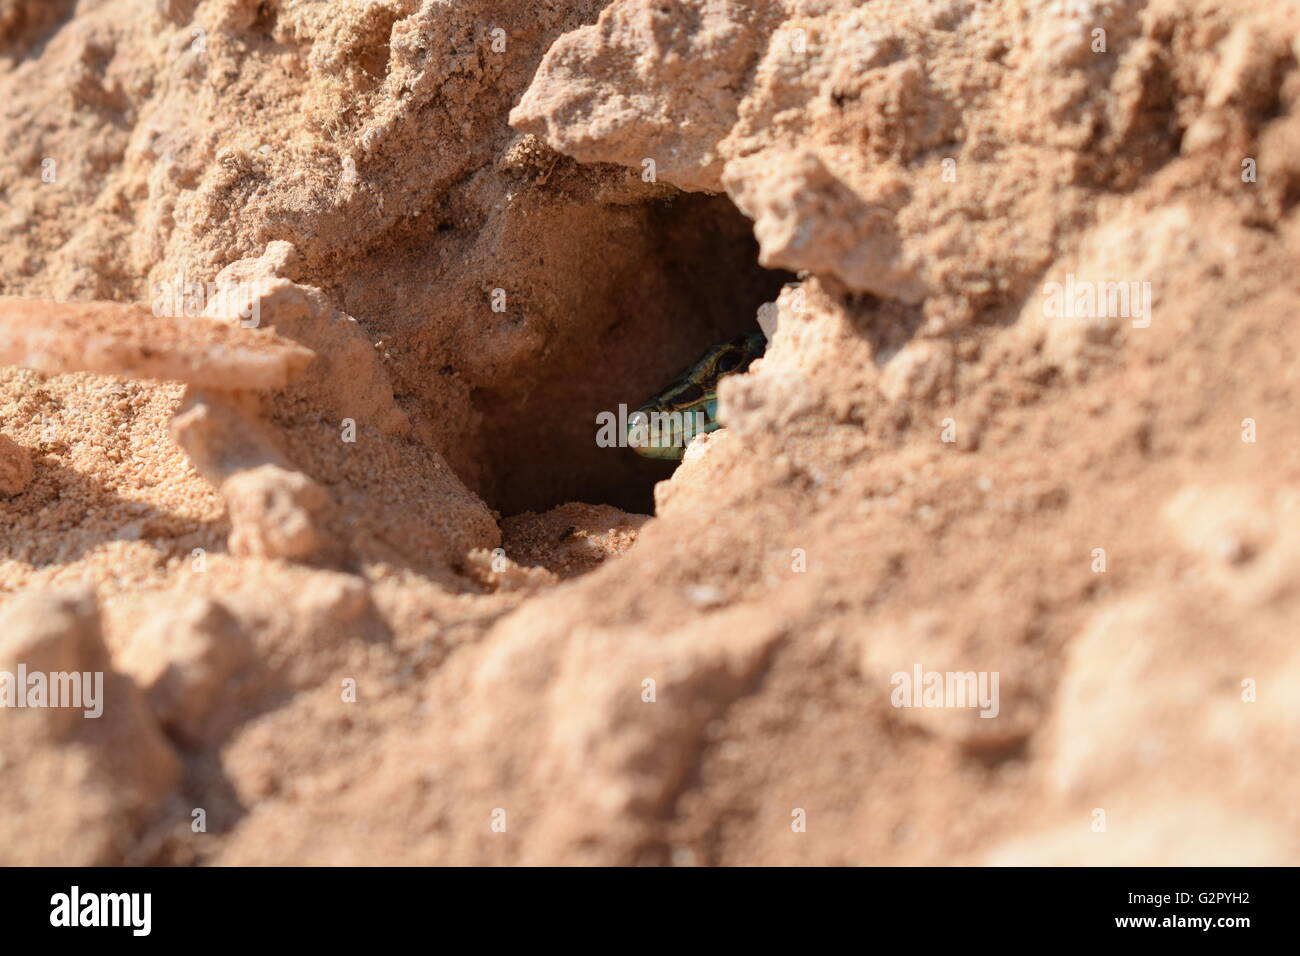 Podarcis pityusensis formenterae lizard looking out from nest in rock Stock Photo